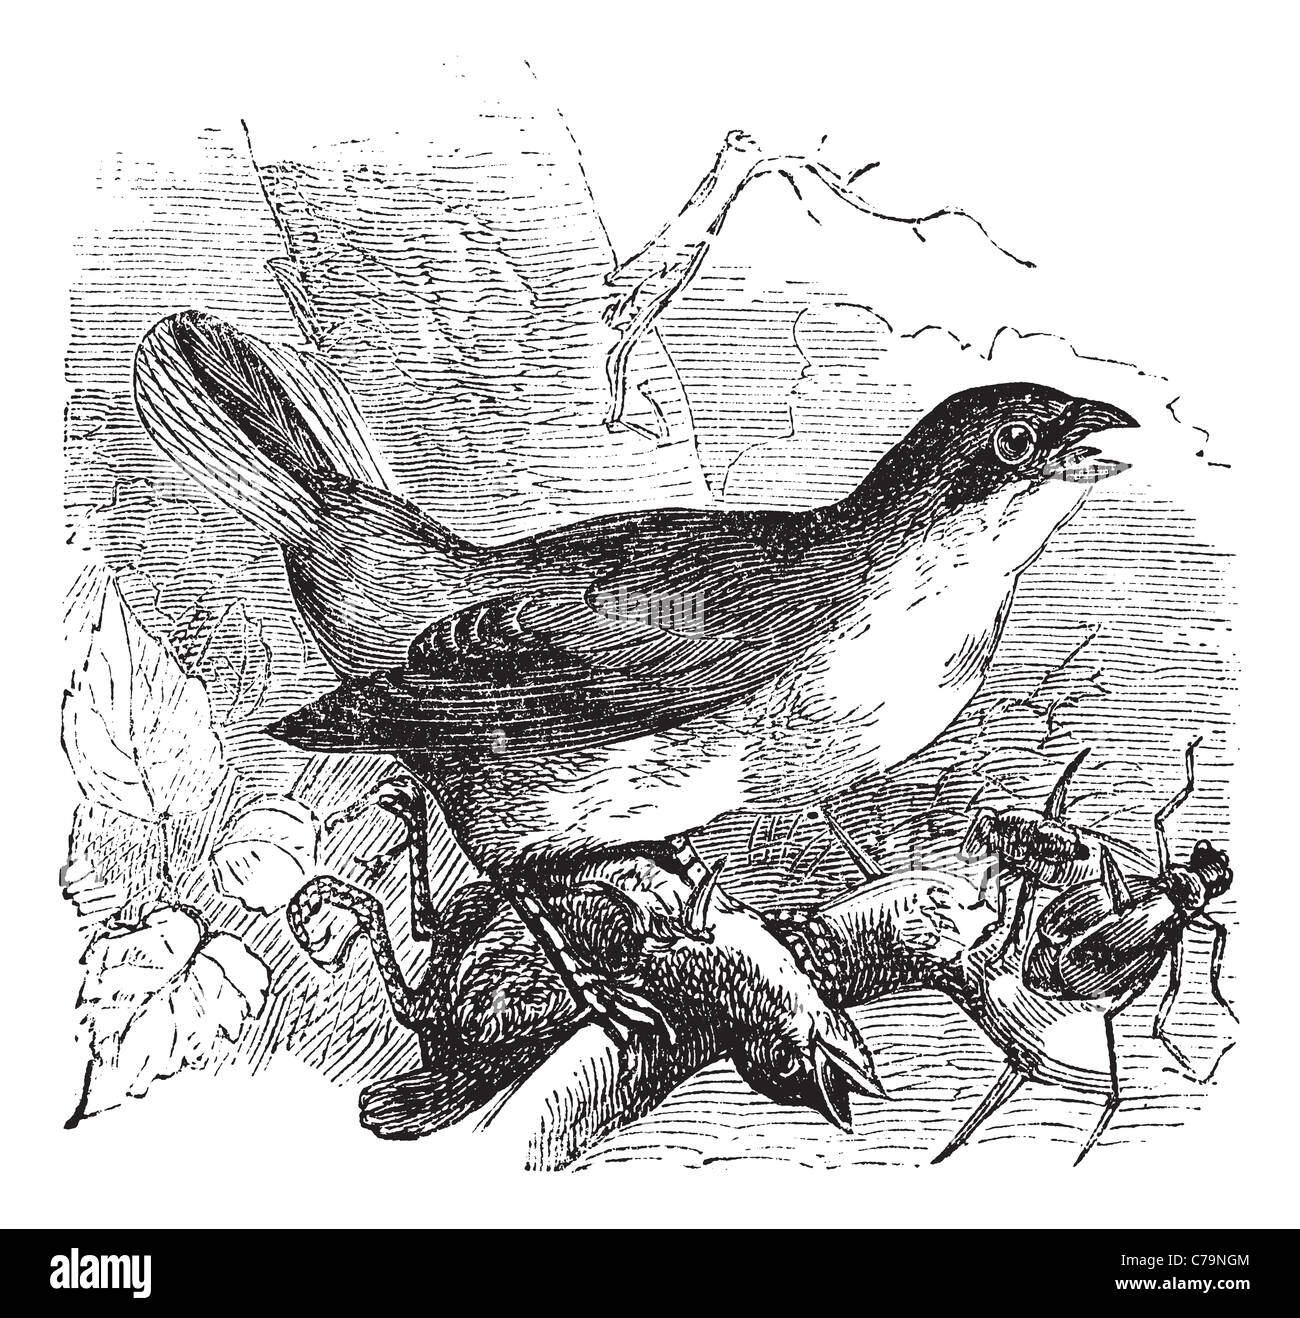 Red-backed Shrike, vintage engraving. Old engraved illustration of a Red-backed Shrike preying on another bird. Stock Photo